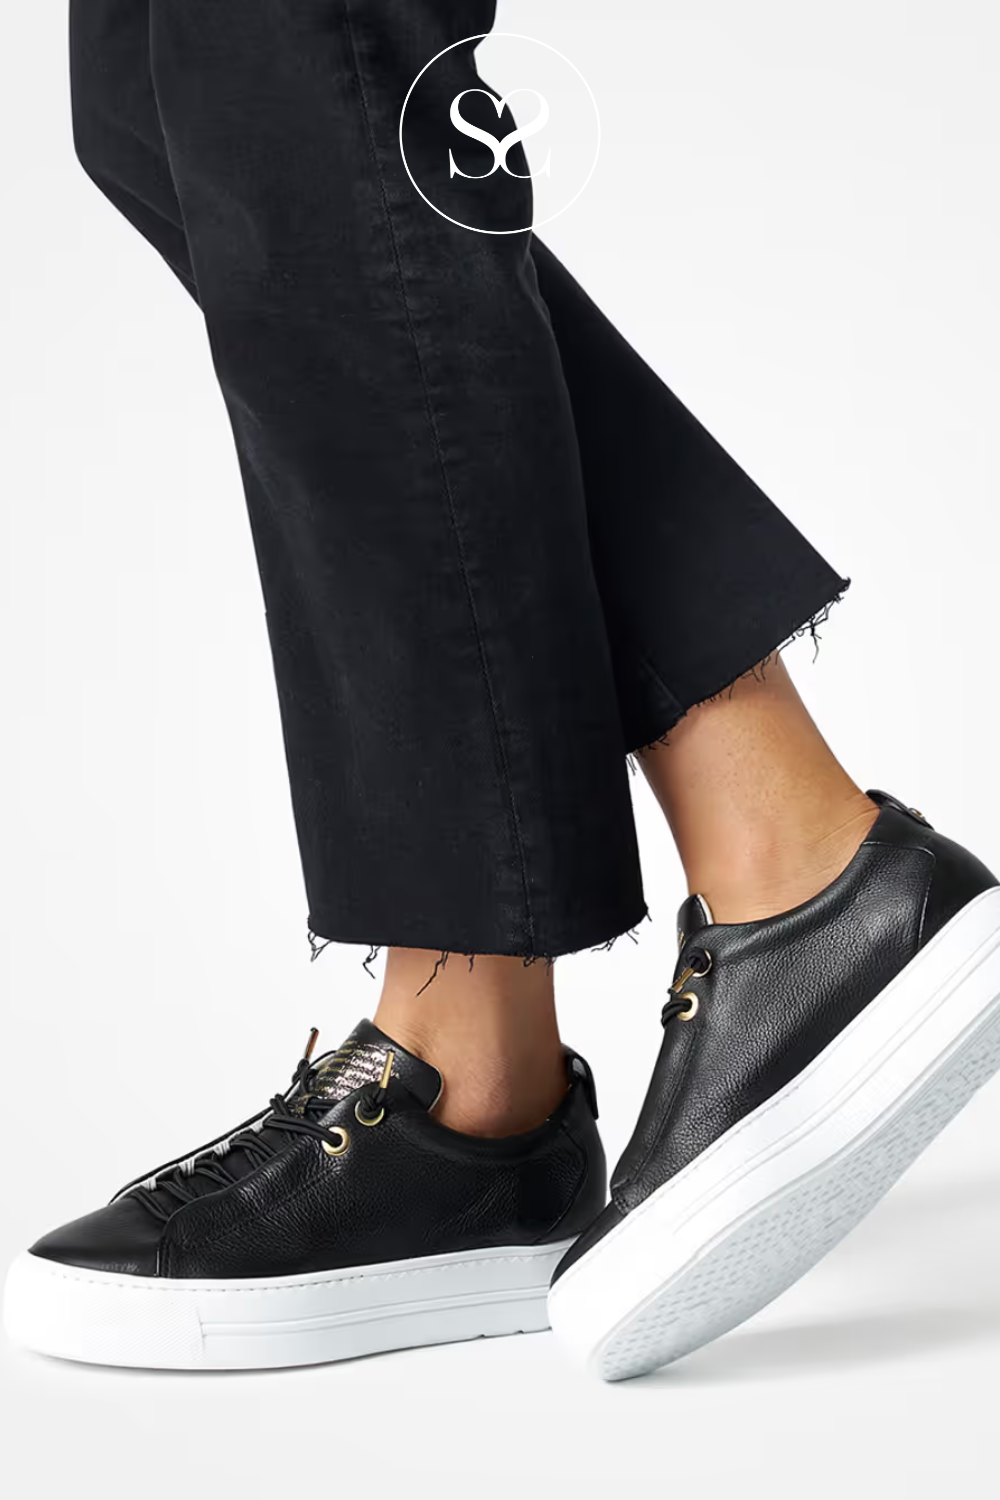 paul green platform slip on trainers in black leather 